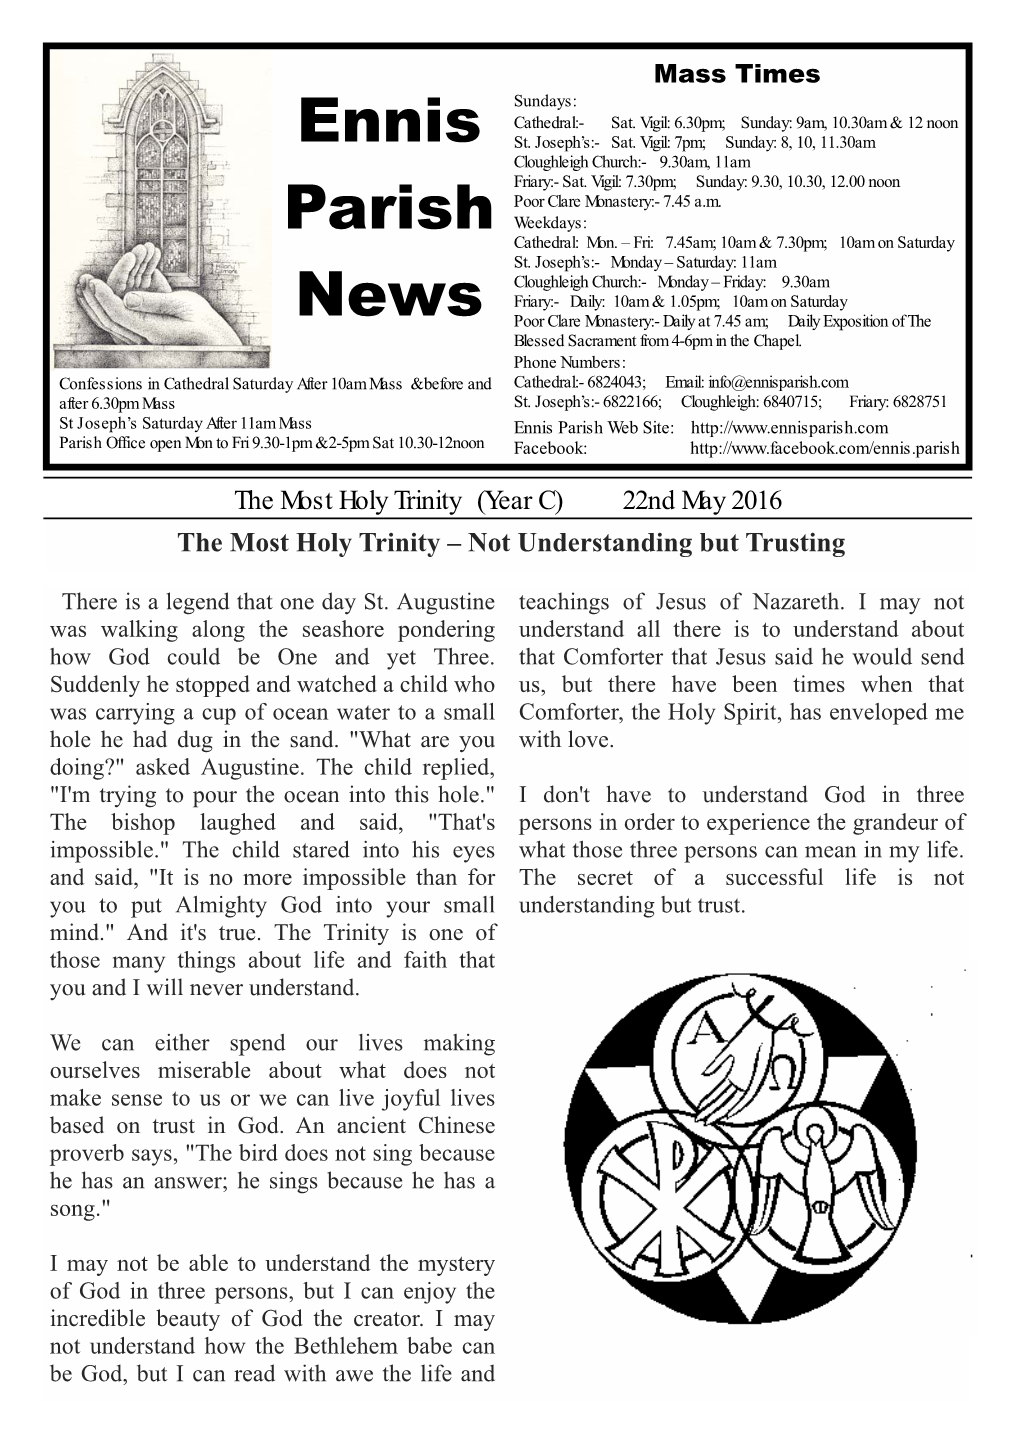 22Nd May 2016 the Most Holy Trinity – Not Understanding but Trusting